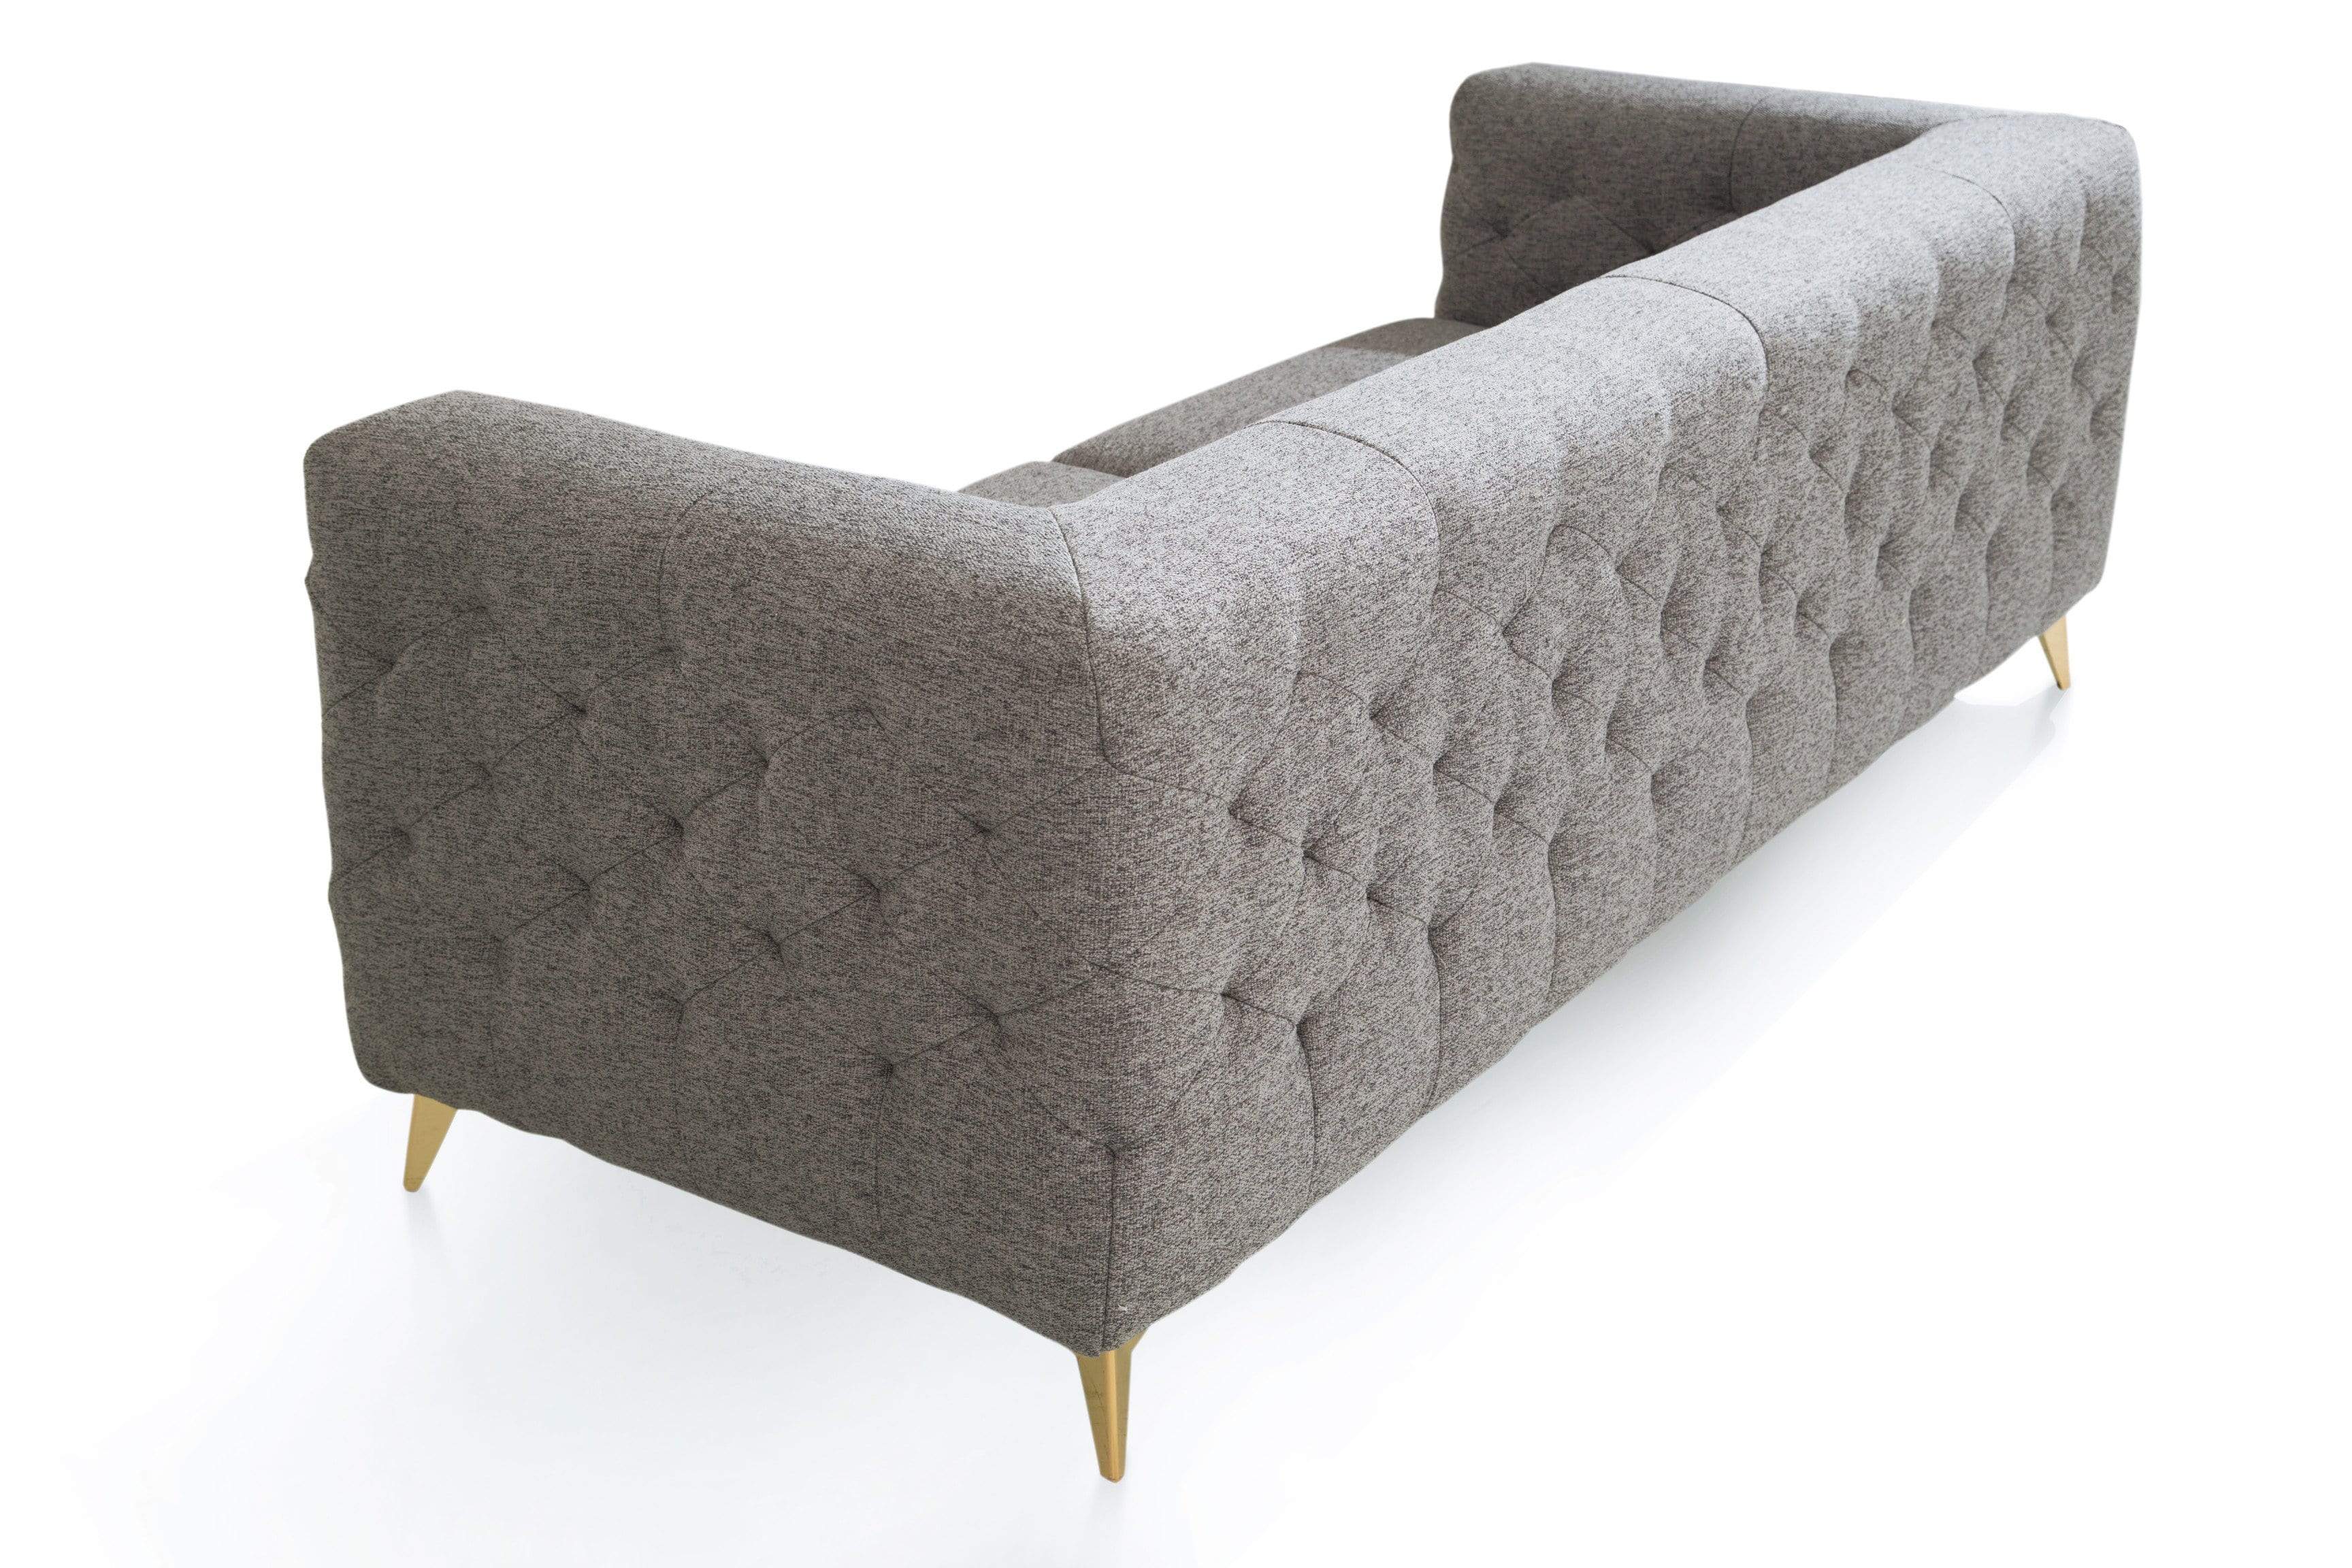 Carlyle Sofa Linen Textured Upholstery Tufted Shelter Arm Gold Tone Metal Legs